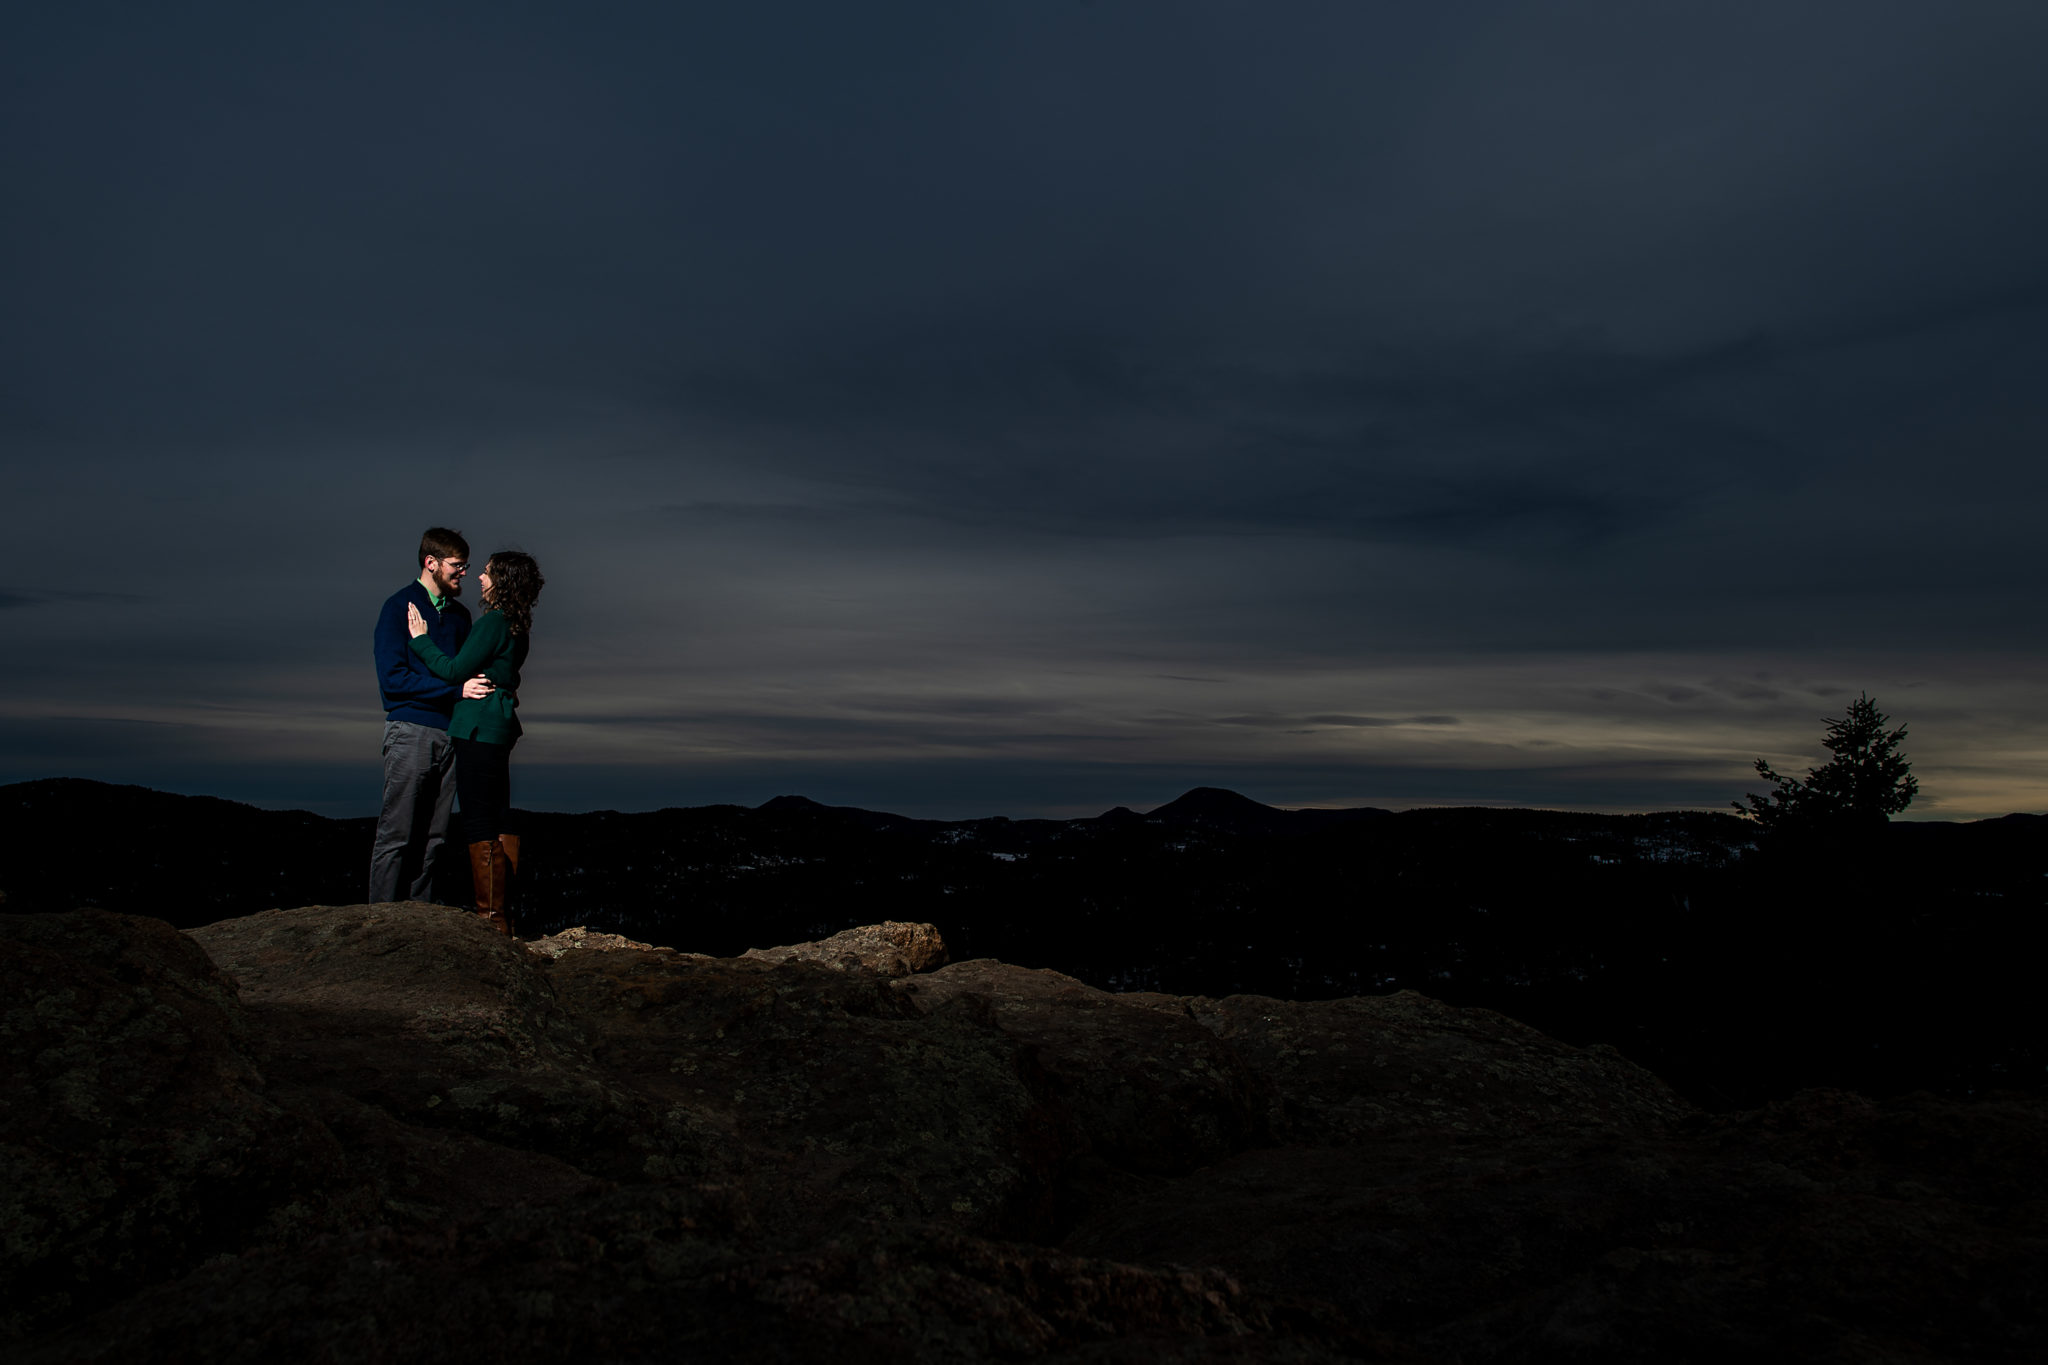 Evergreen engagement photos at Alderfer/Three Sisters Park and Evergreen Lake in Evergreen, Colorado.